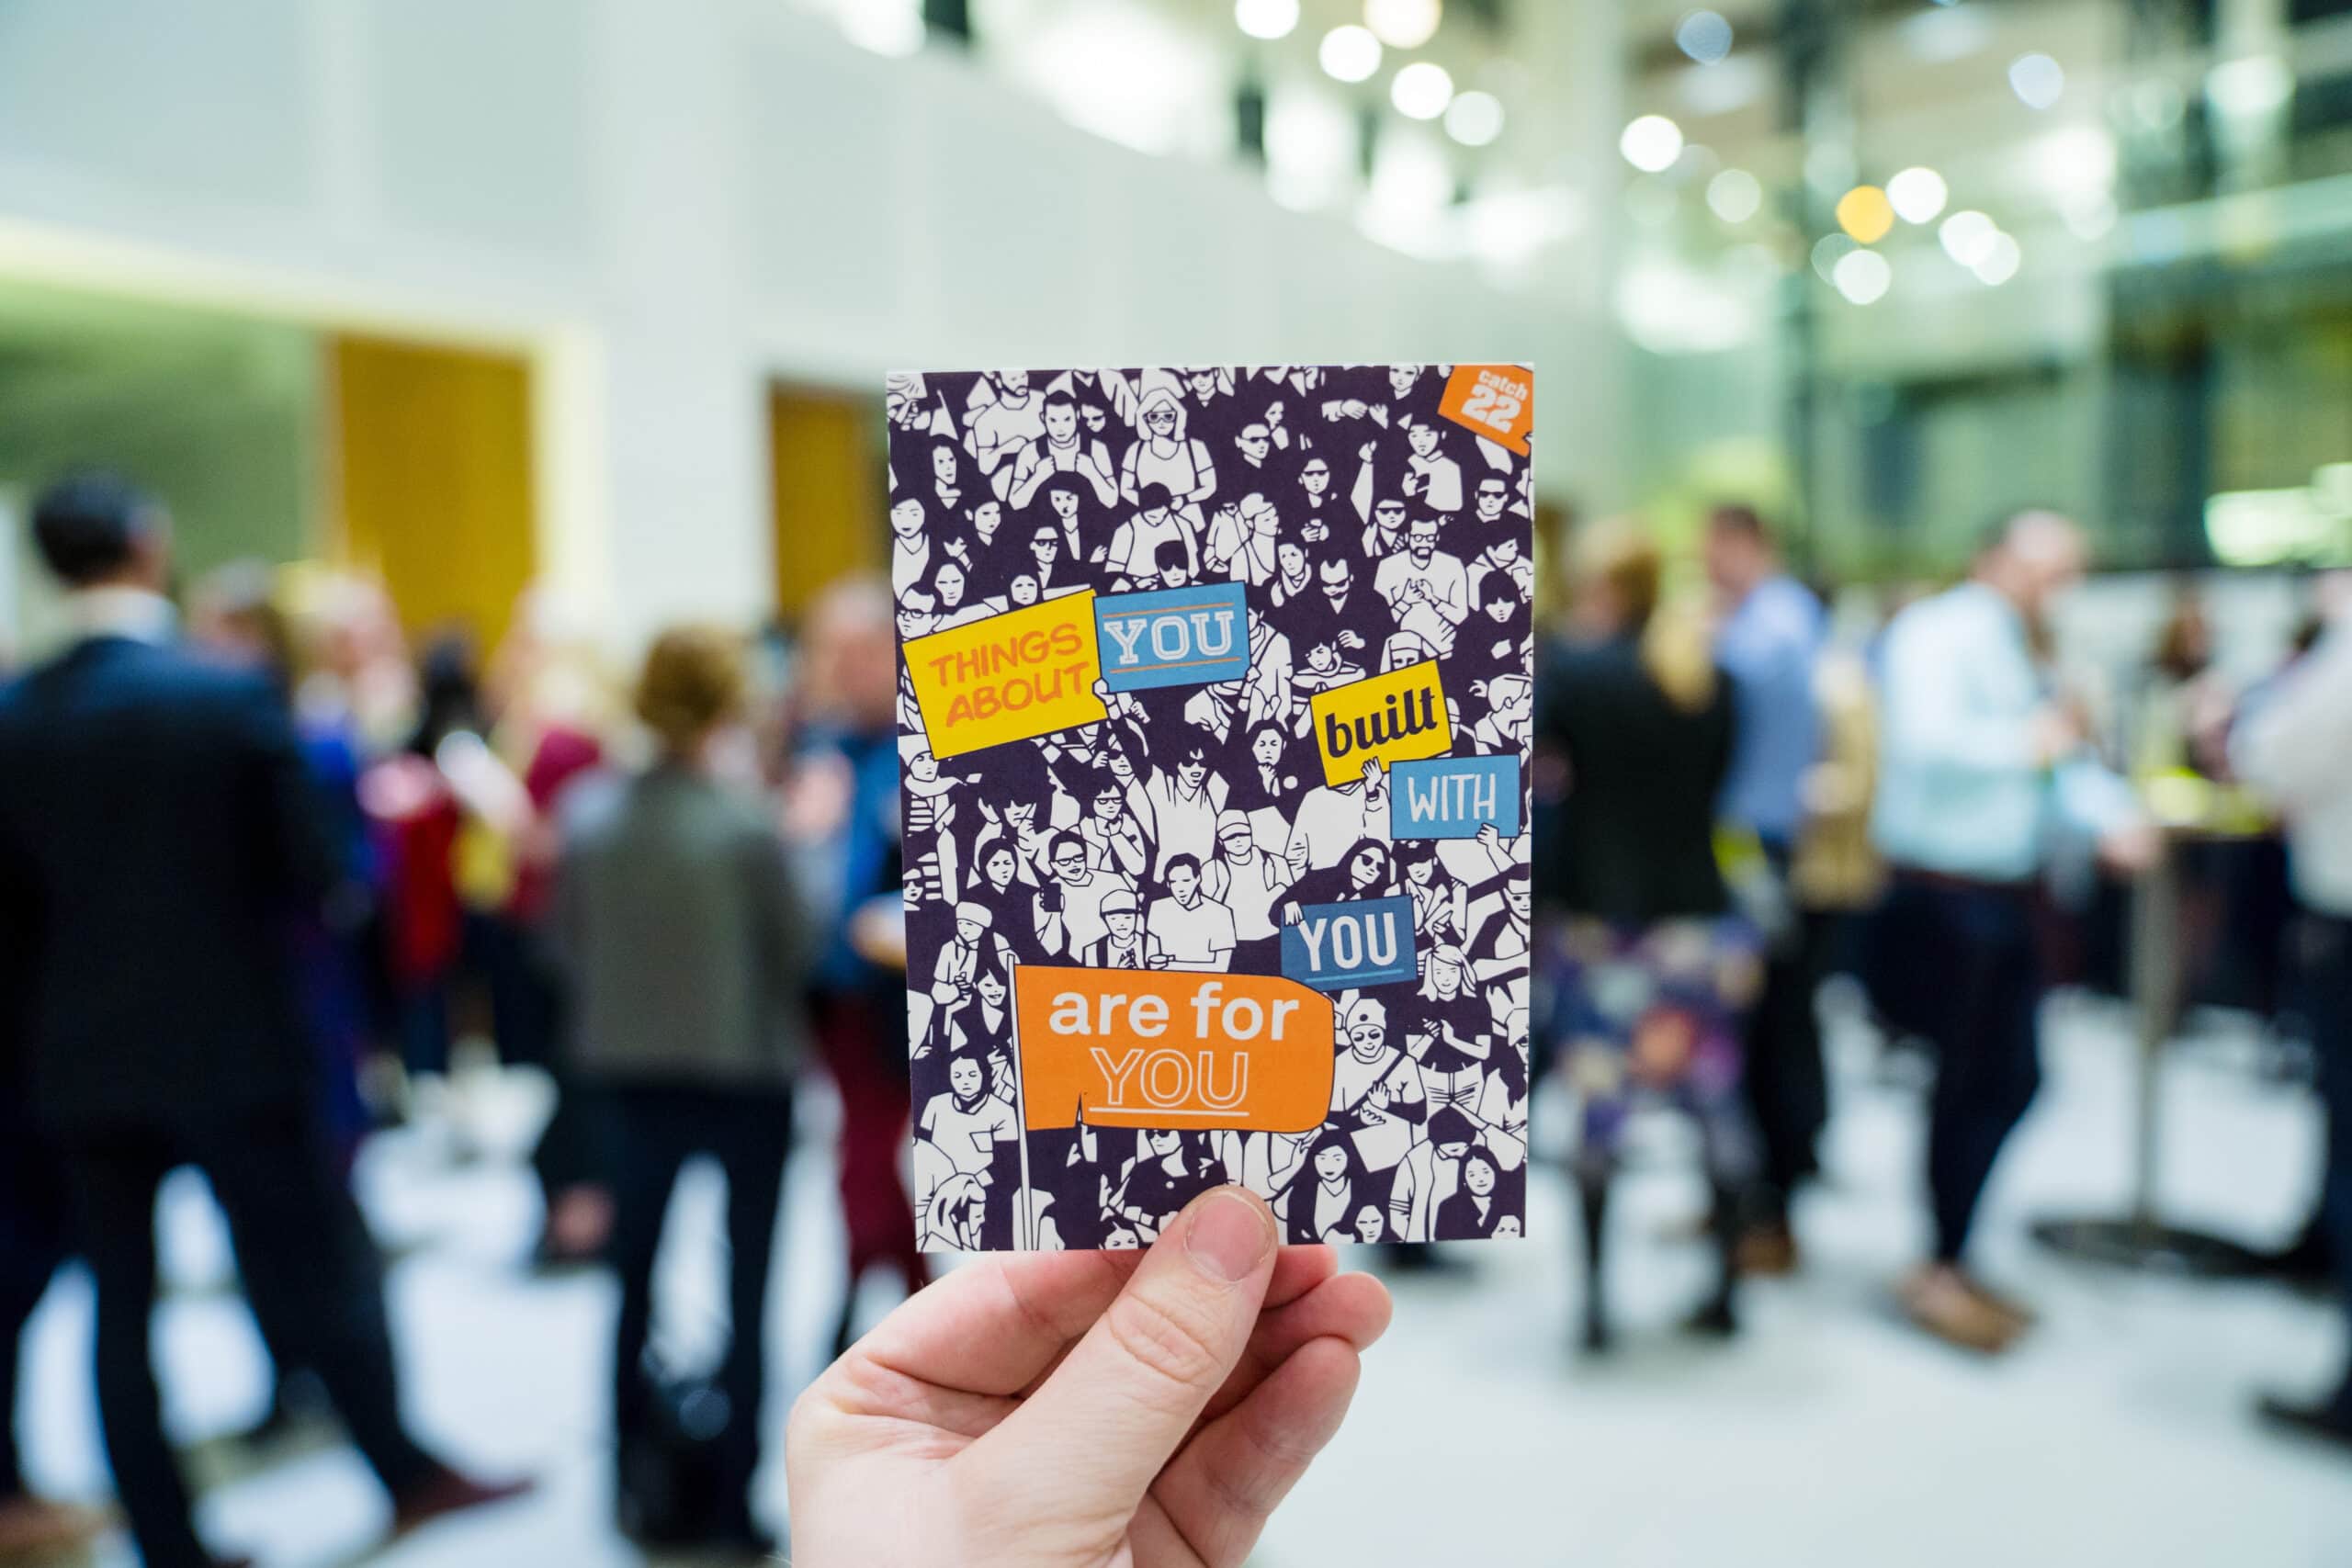 A hand holds out a Catch22-branded postcard which reads "Things about you, built with you, are for you". In the background, there are blurred people networking at an event.